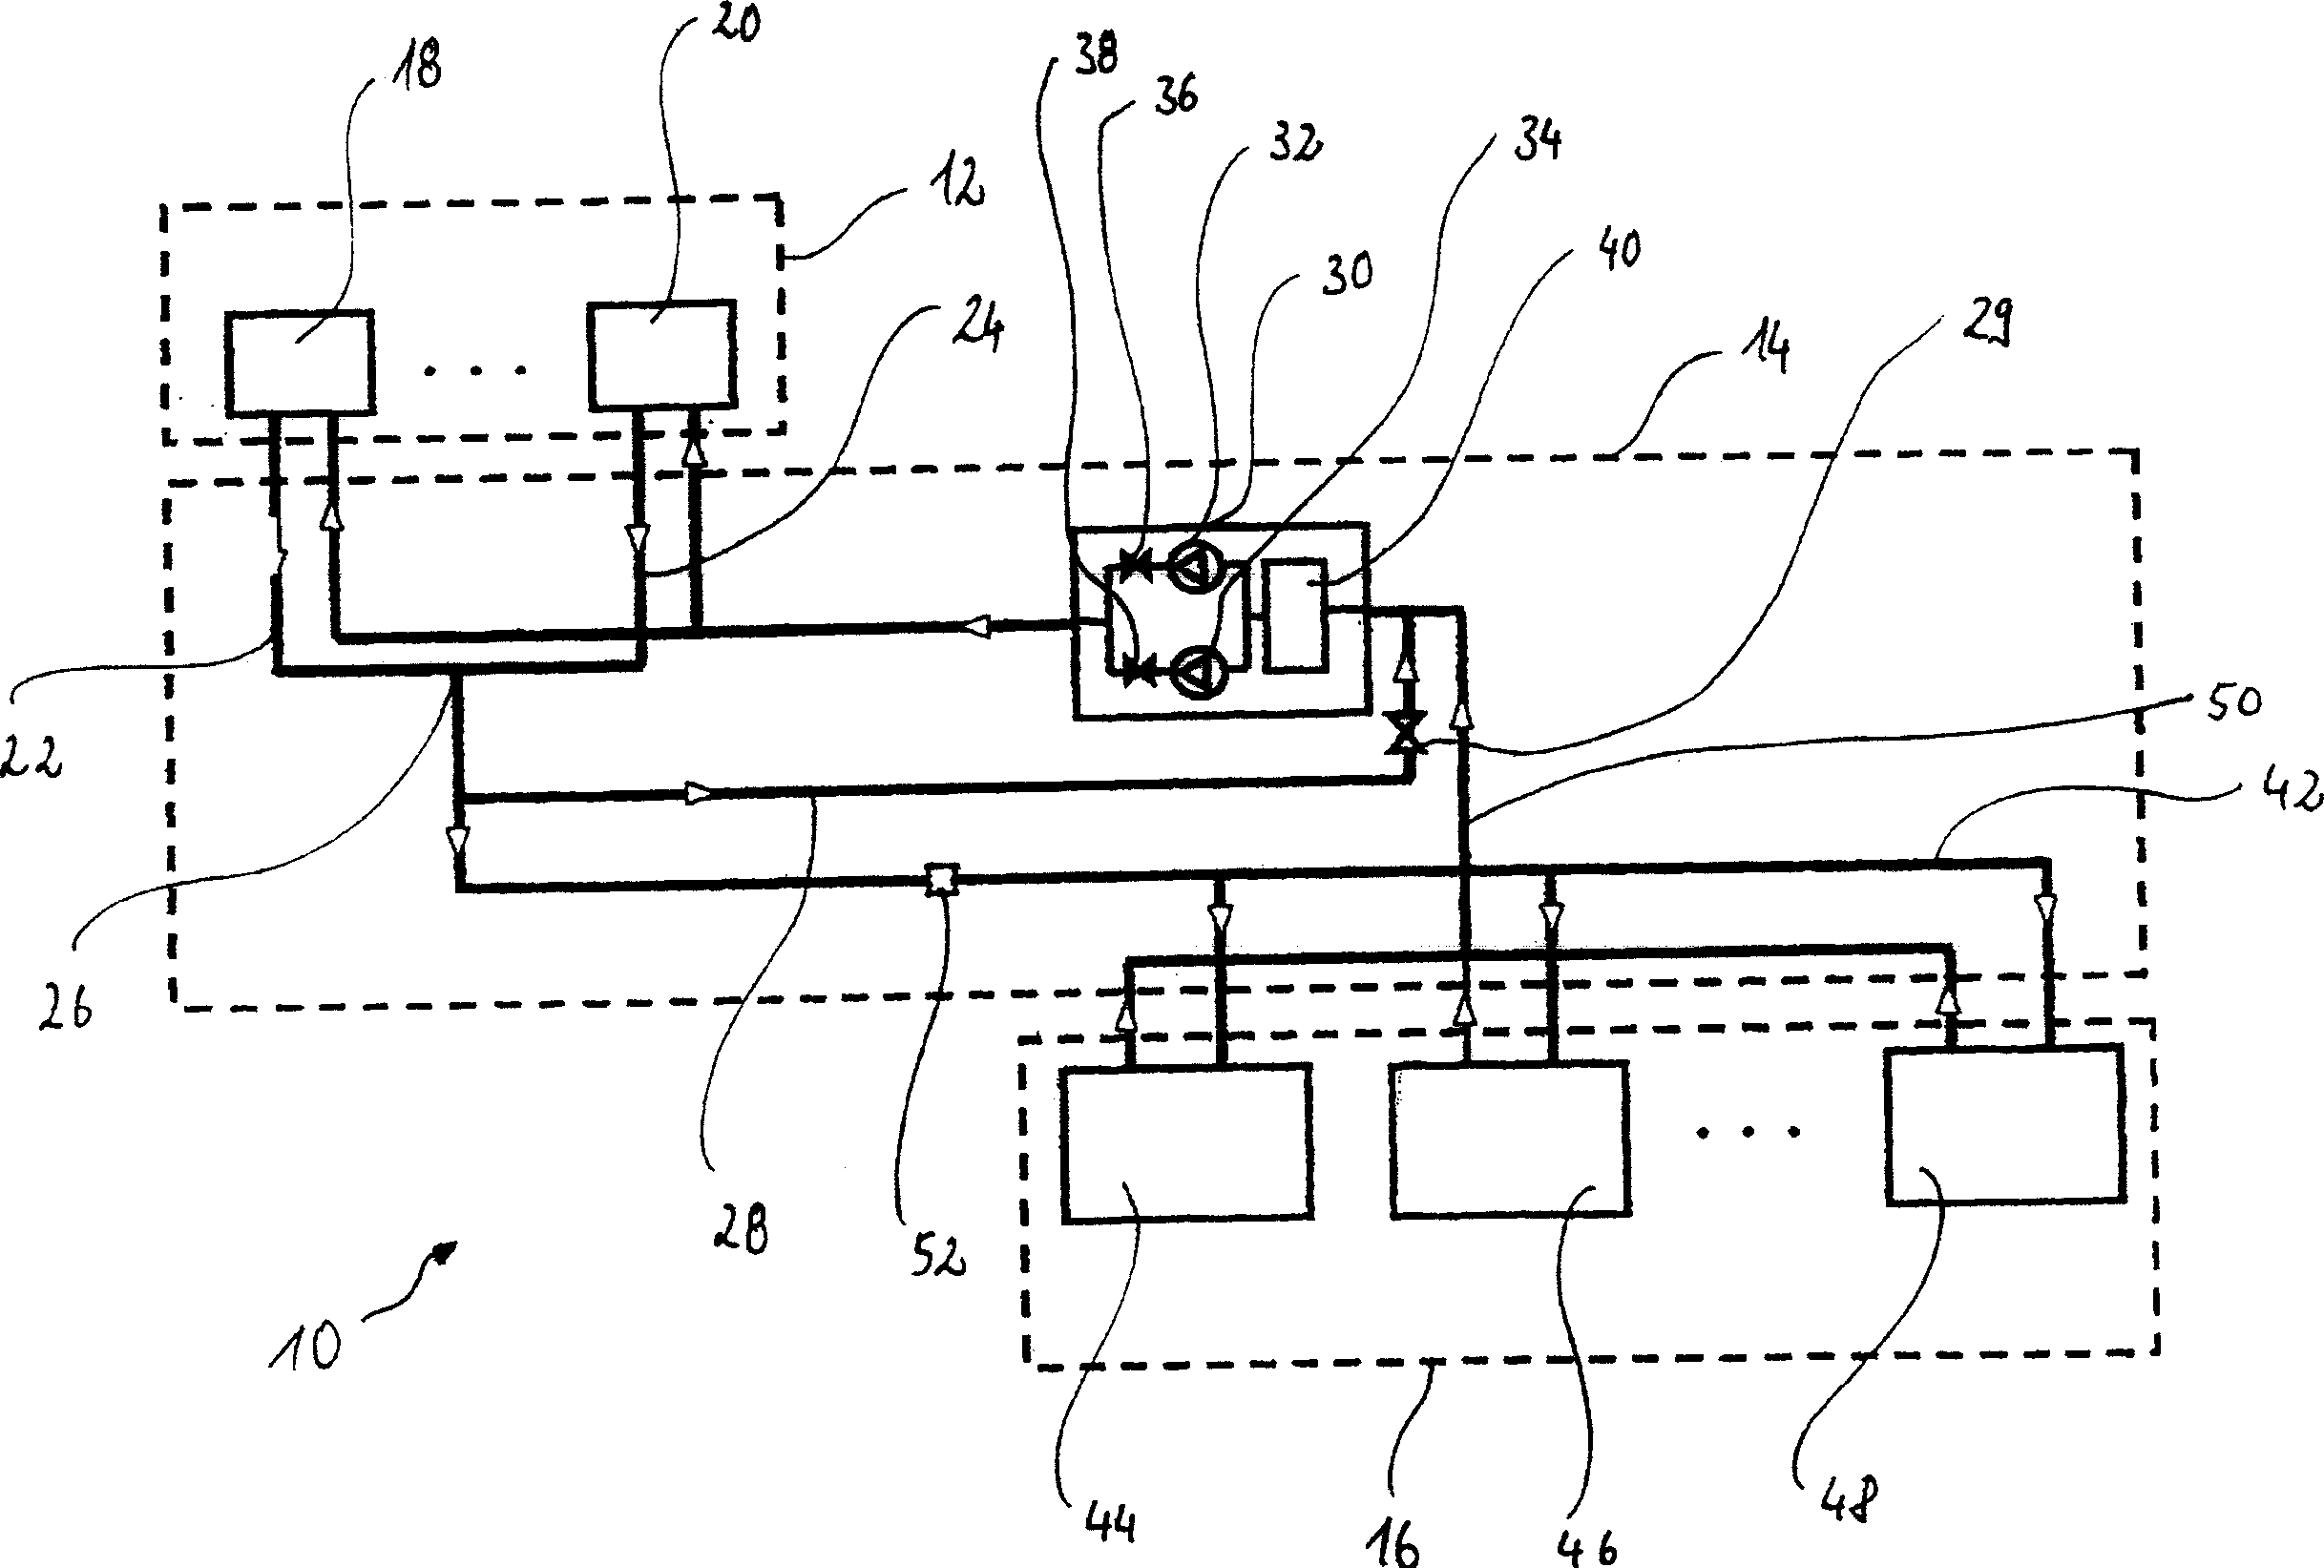 Cooling system for the cooling of heat-producing devices in an aircraft